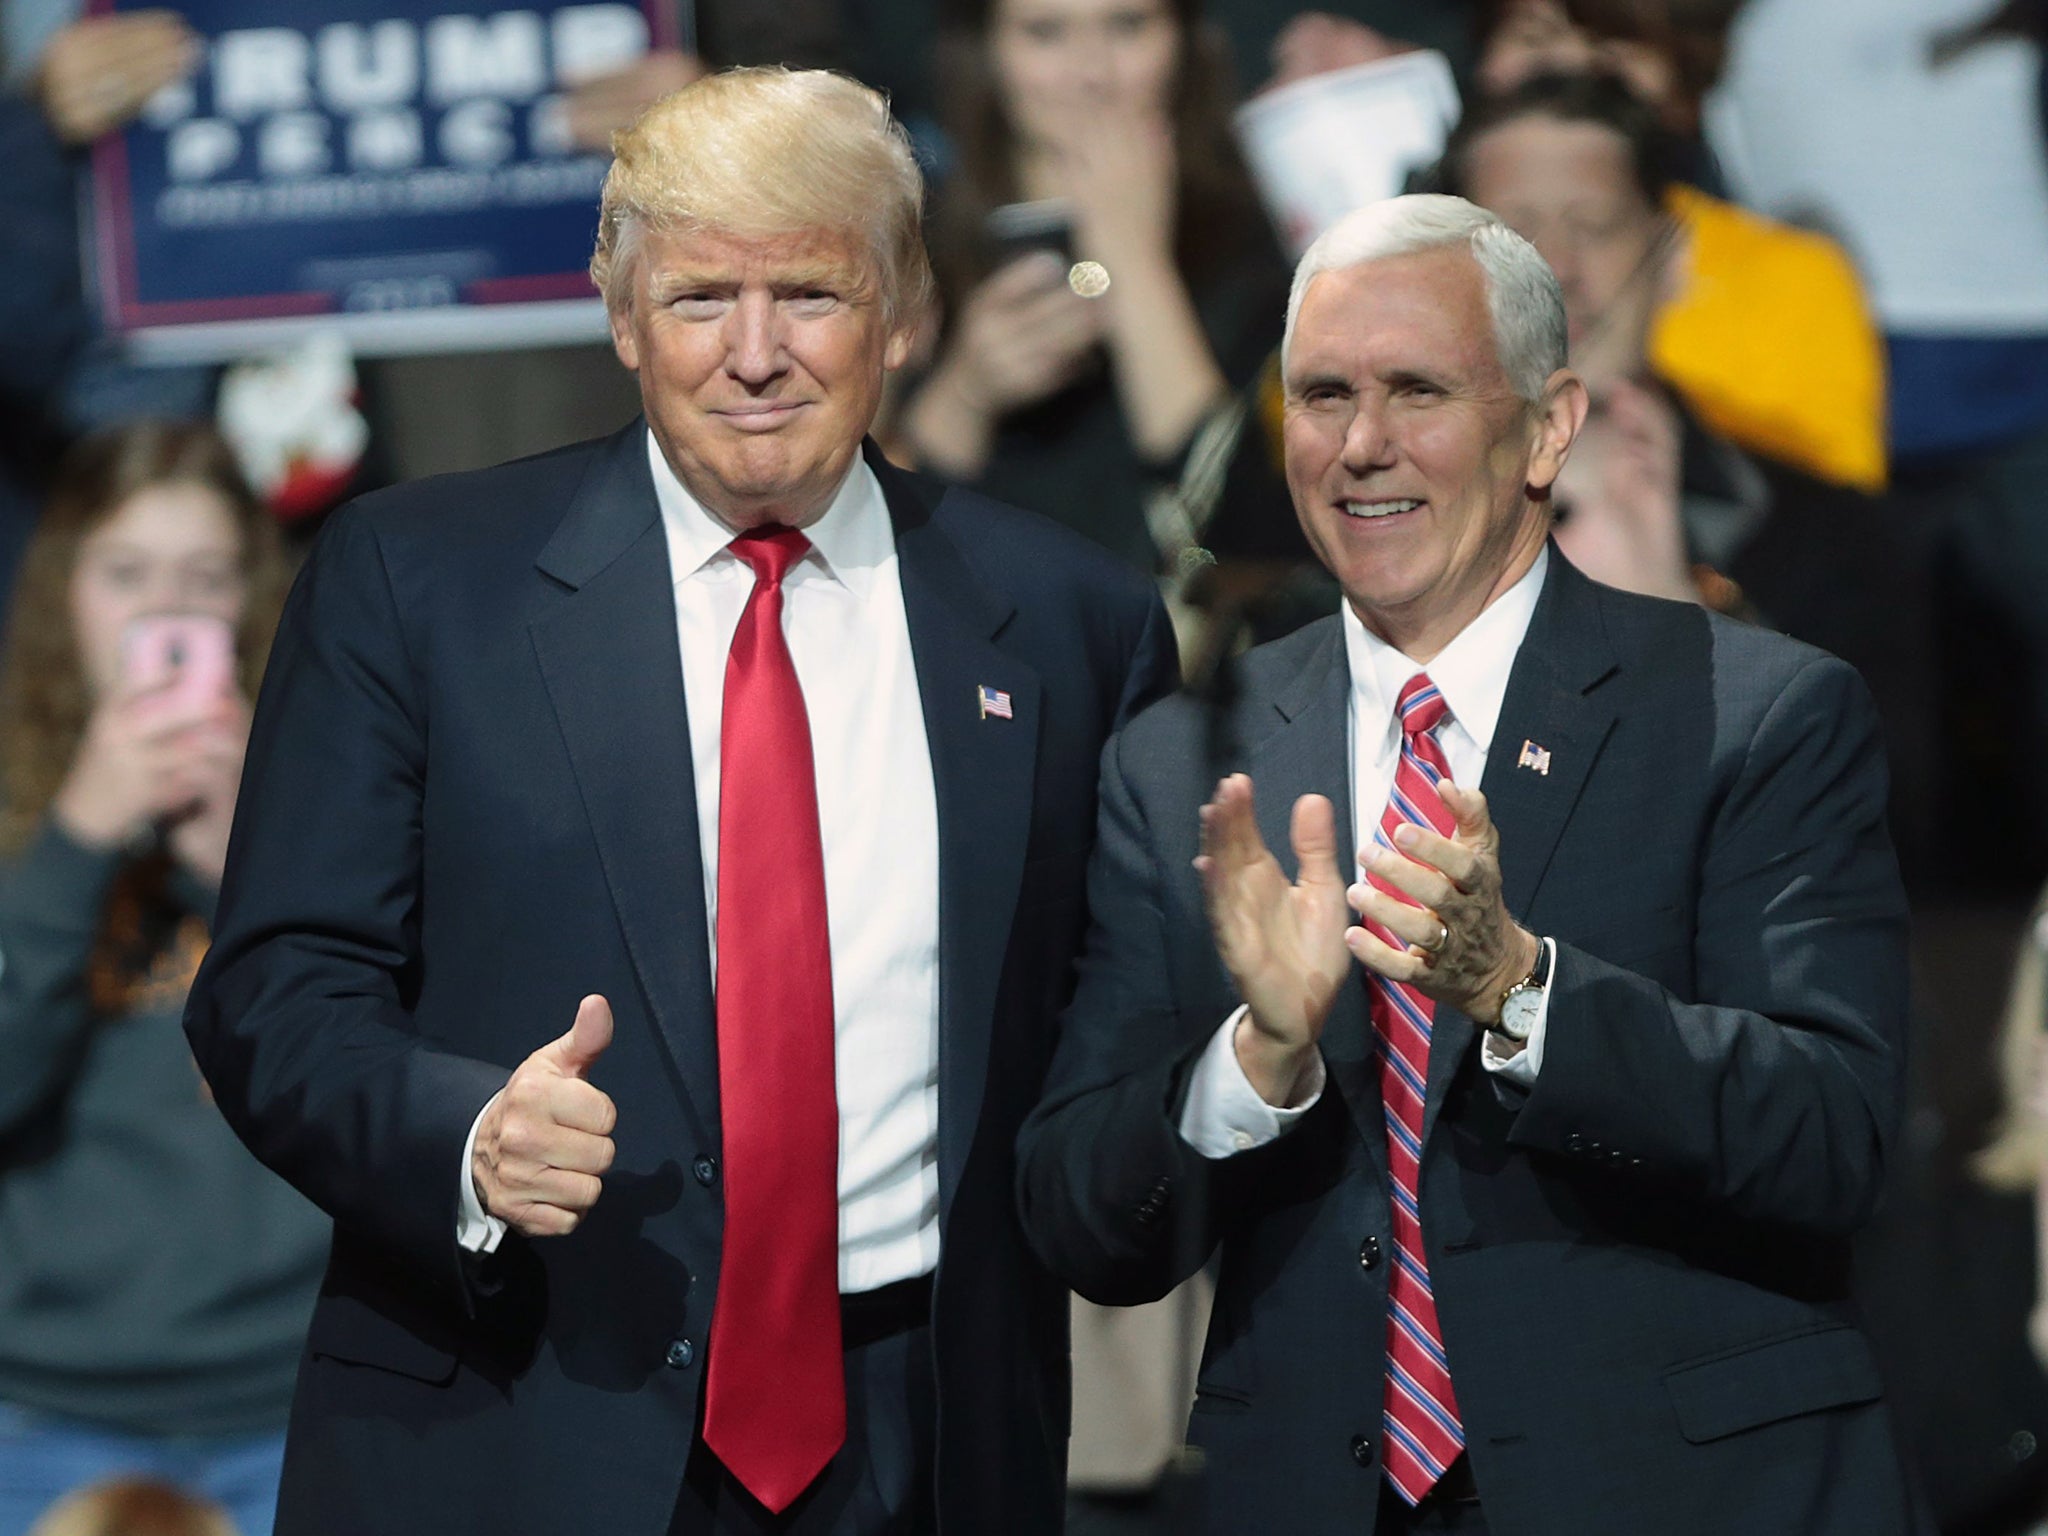 US President-elect Donald Trump stands with his running mate, Vice President-elect Mike Pence